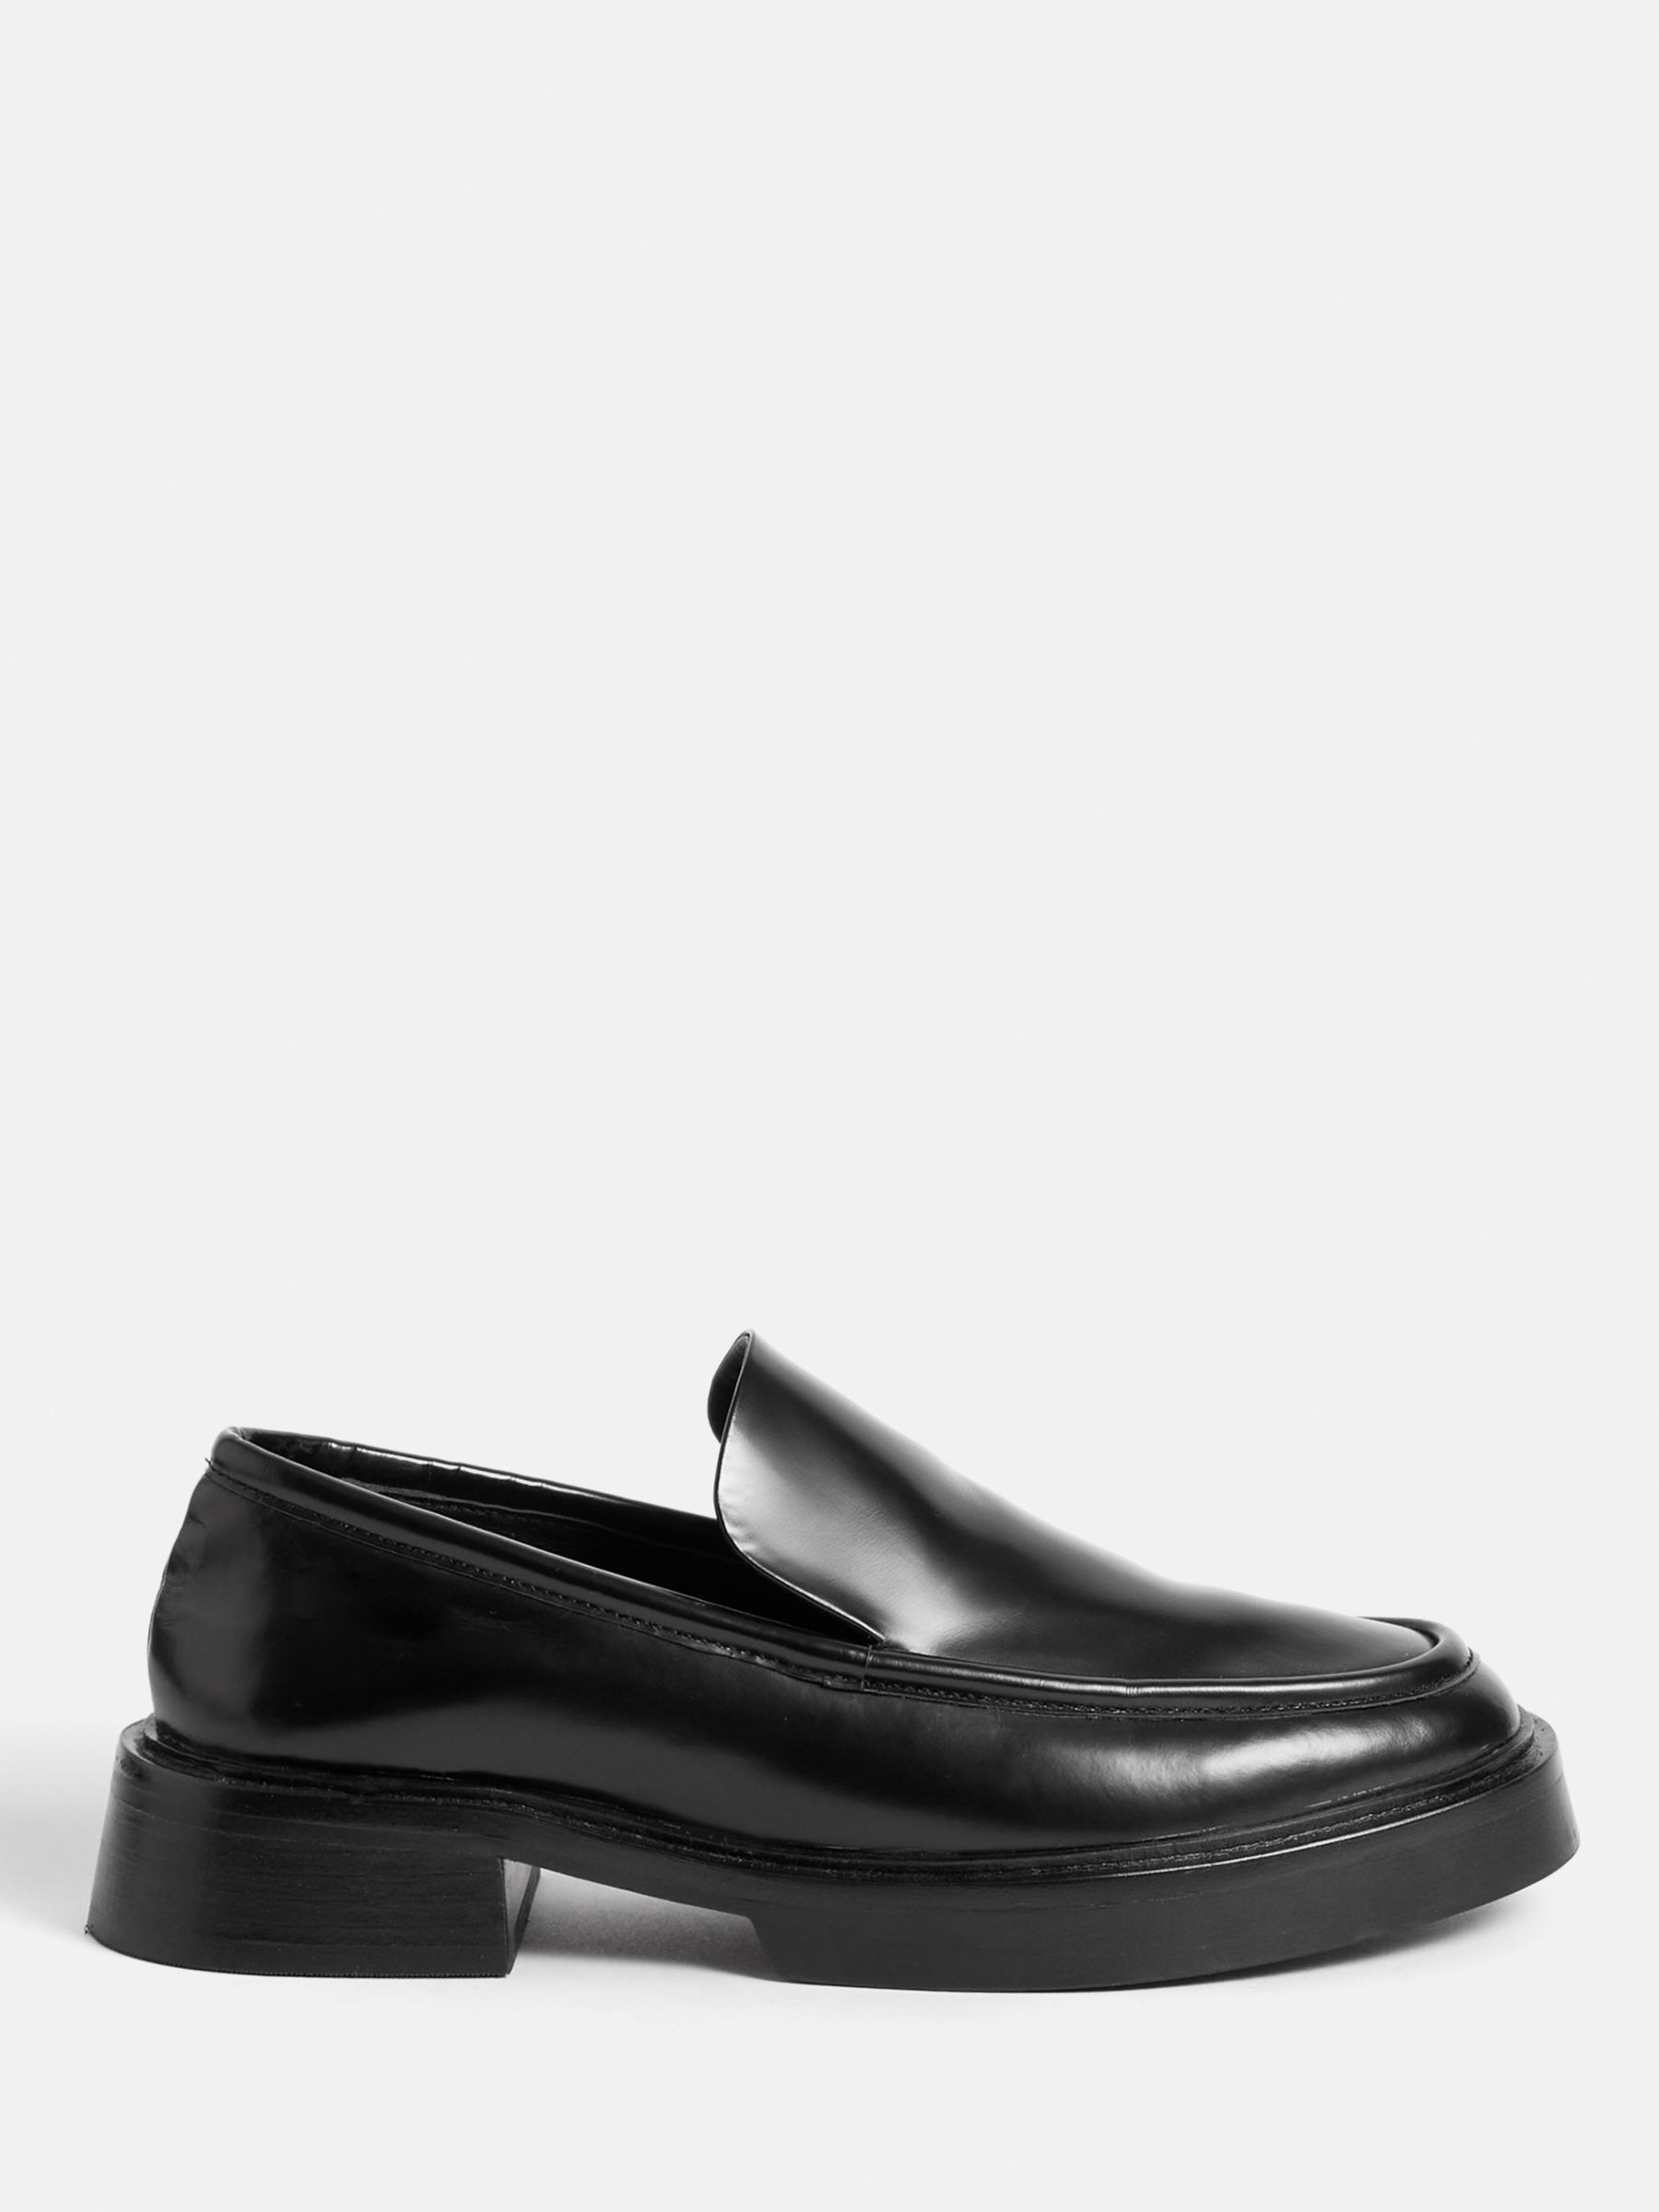 Jigsaw Wickham Leather Loafers, Black at John Lewis & Partners